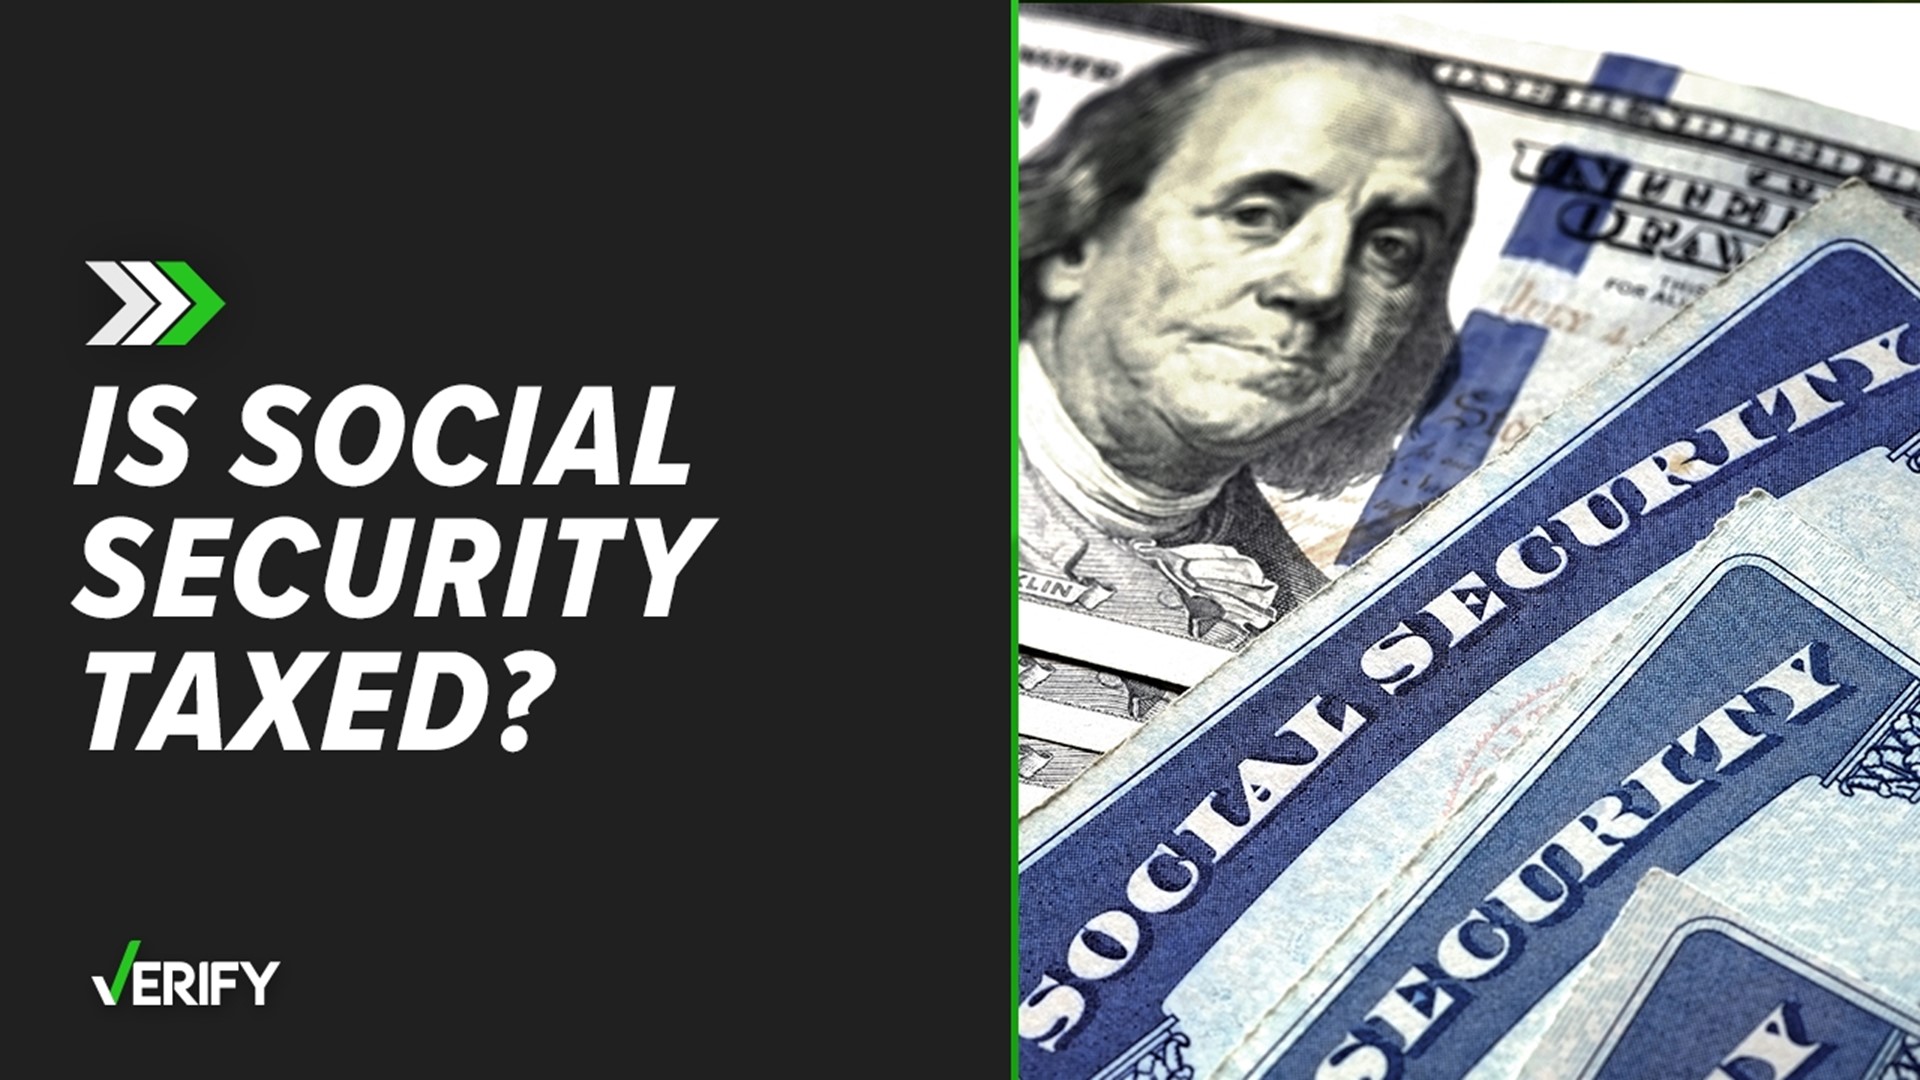 You may have to pay taxes on a portion of your Social Security benefits depending on your income. Here’s what you should know.